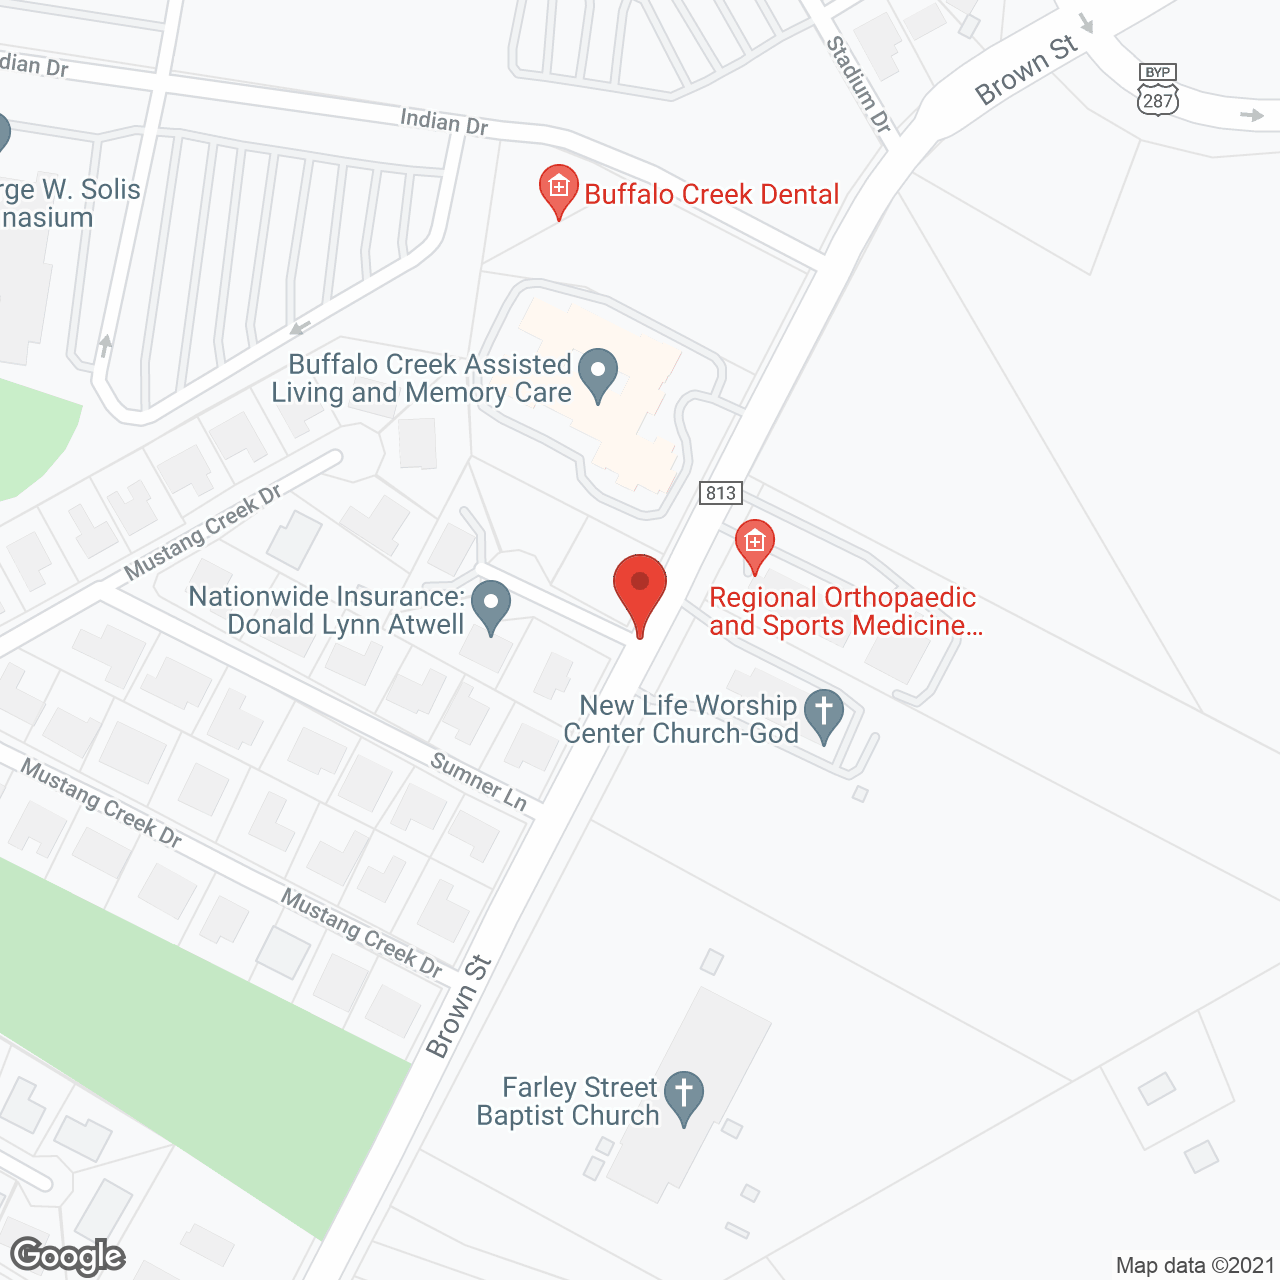 Buffalo Creek Assisted Living and Memory Care in google map